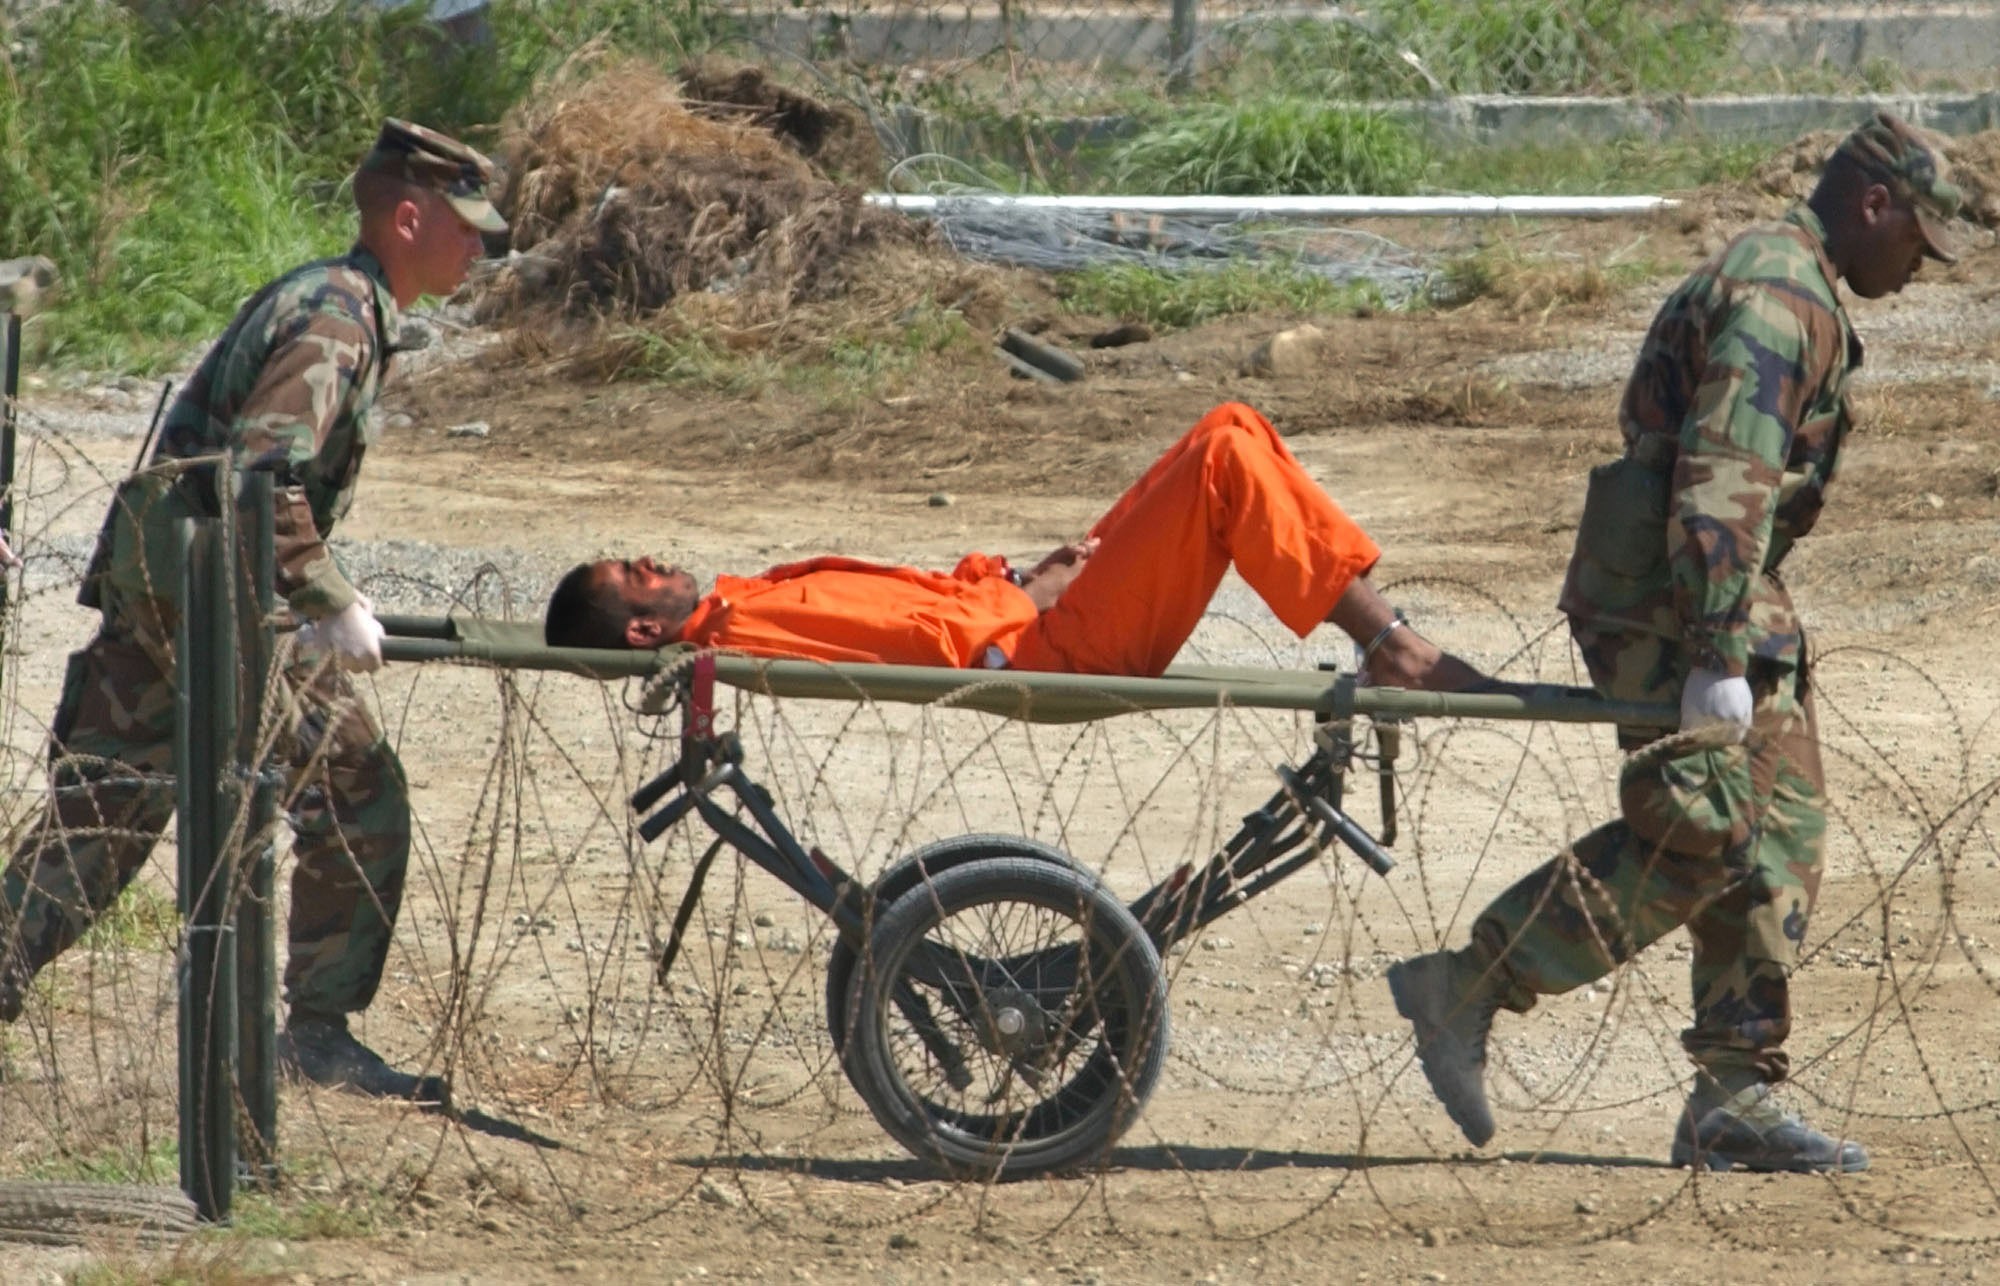 A detainee from Afghanistan is wheeled on a stretcher before being interrogated by military officials at the Guantanamo Bay US Naval Base in Cuba in 2002. Photo: AP